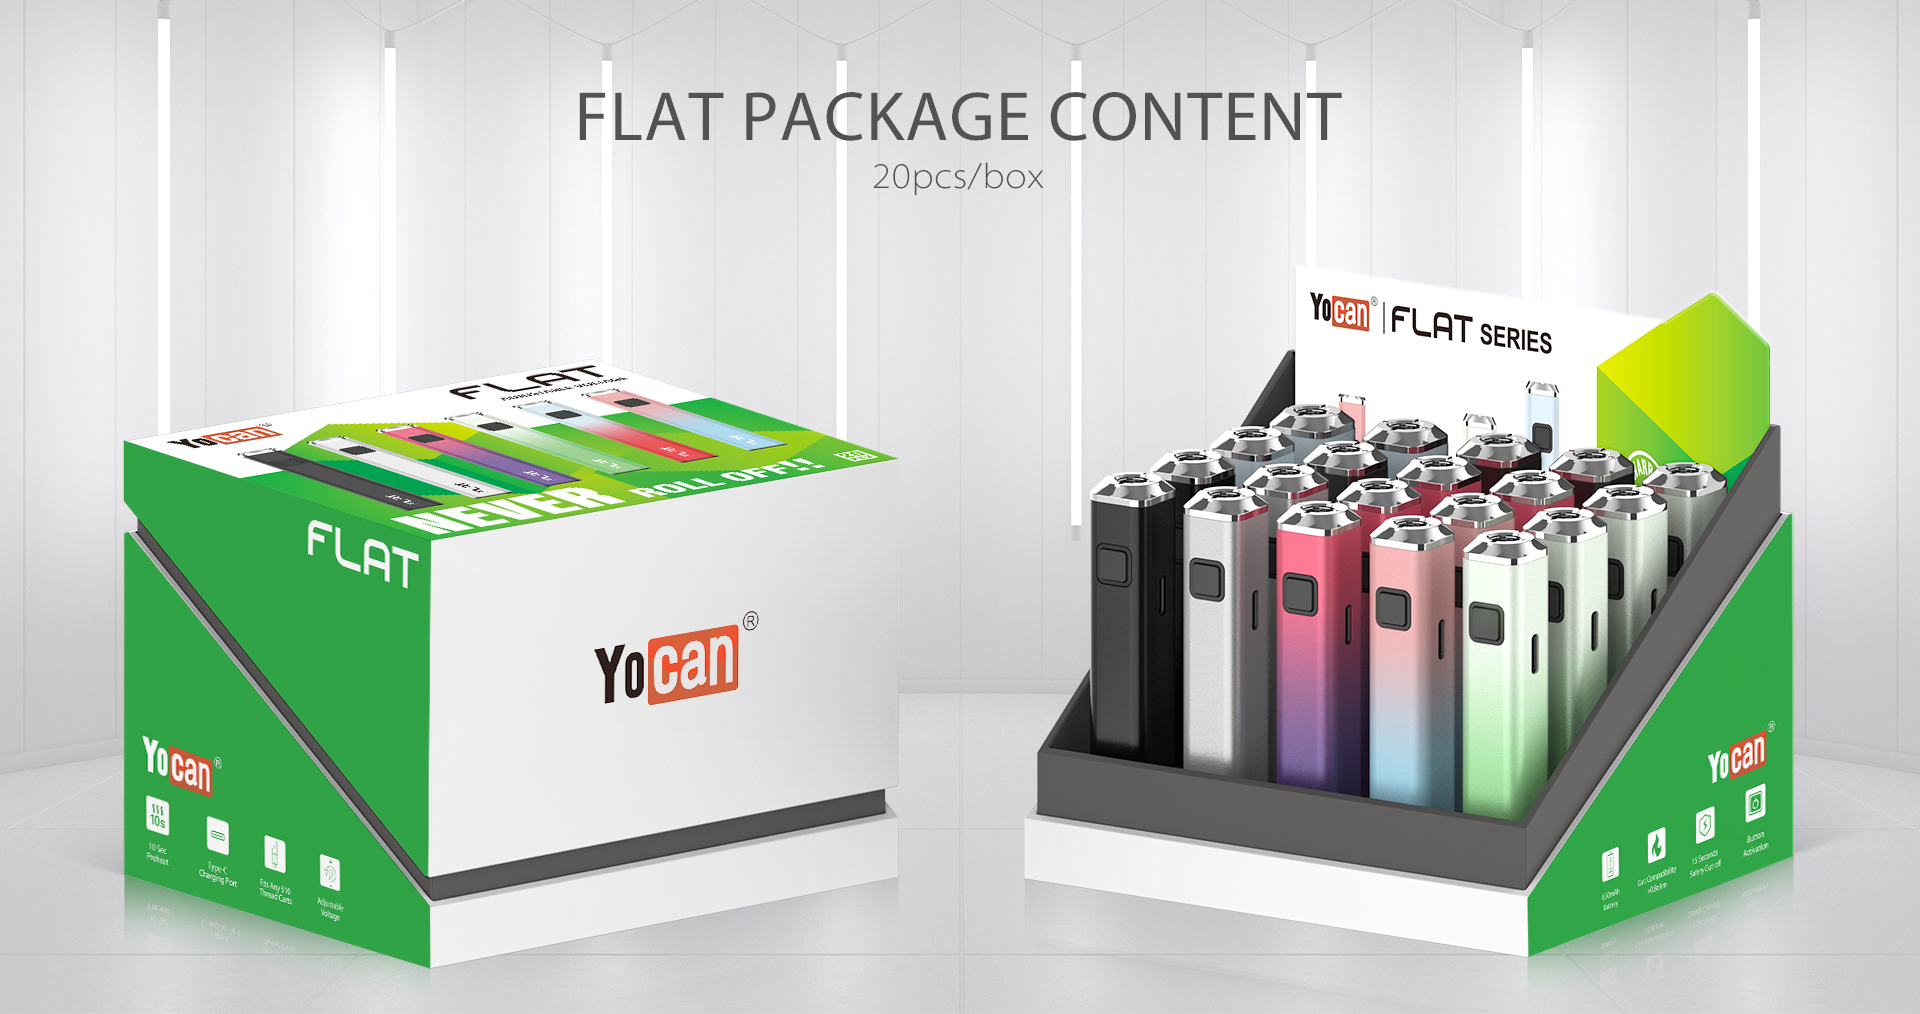 The package of Yocan Flat 510 thread vape pen